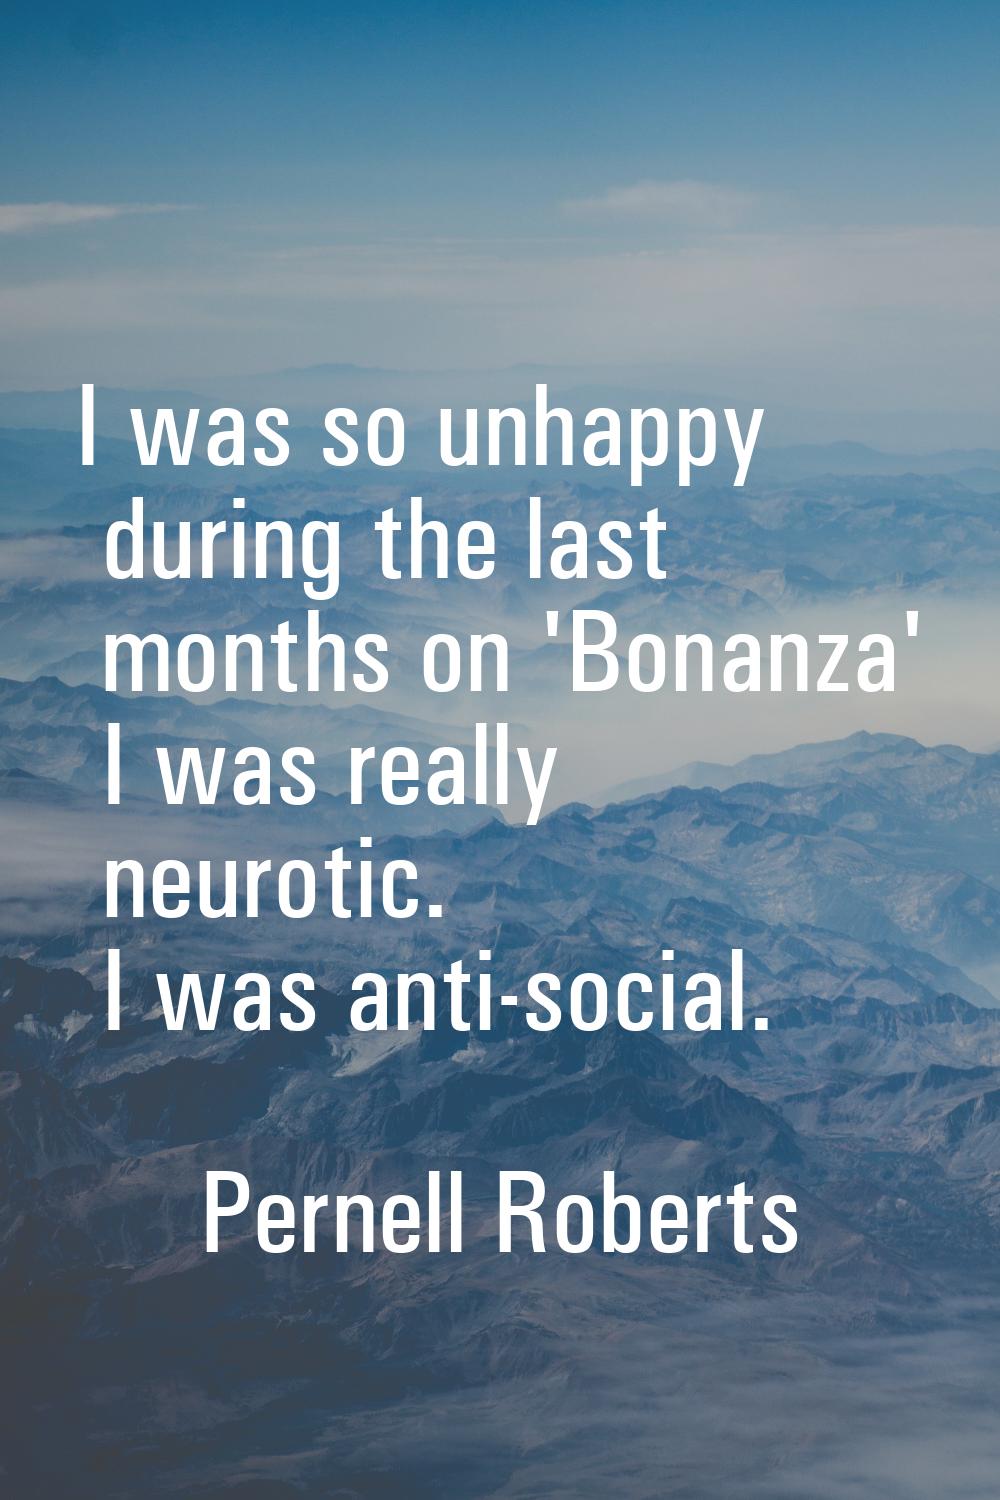 I was so unhappy during the last months on 'Bonanza' I was really neurotic. I was anti-social.